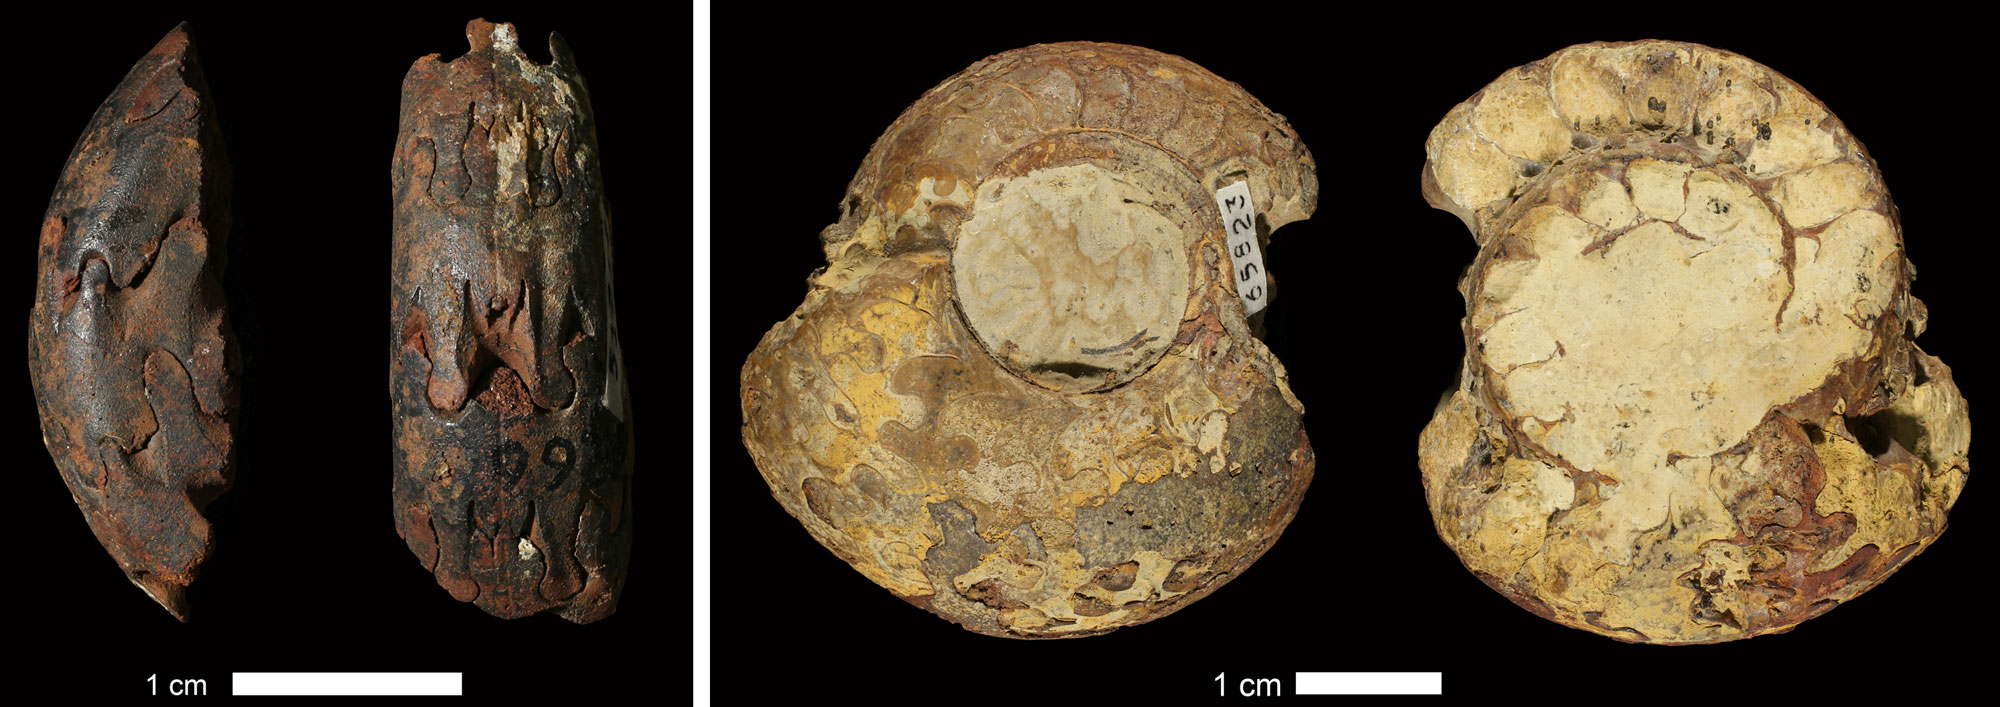 2-Panel figure showing photos of coiled ammonoid shells. Panel 1: Portion of a shell with complex sutures. Panel 2: Relatively complete shell with complex sutures.